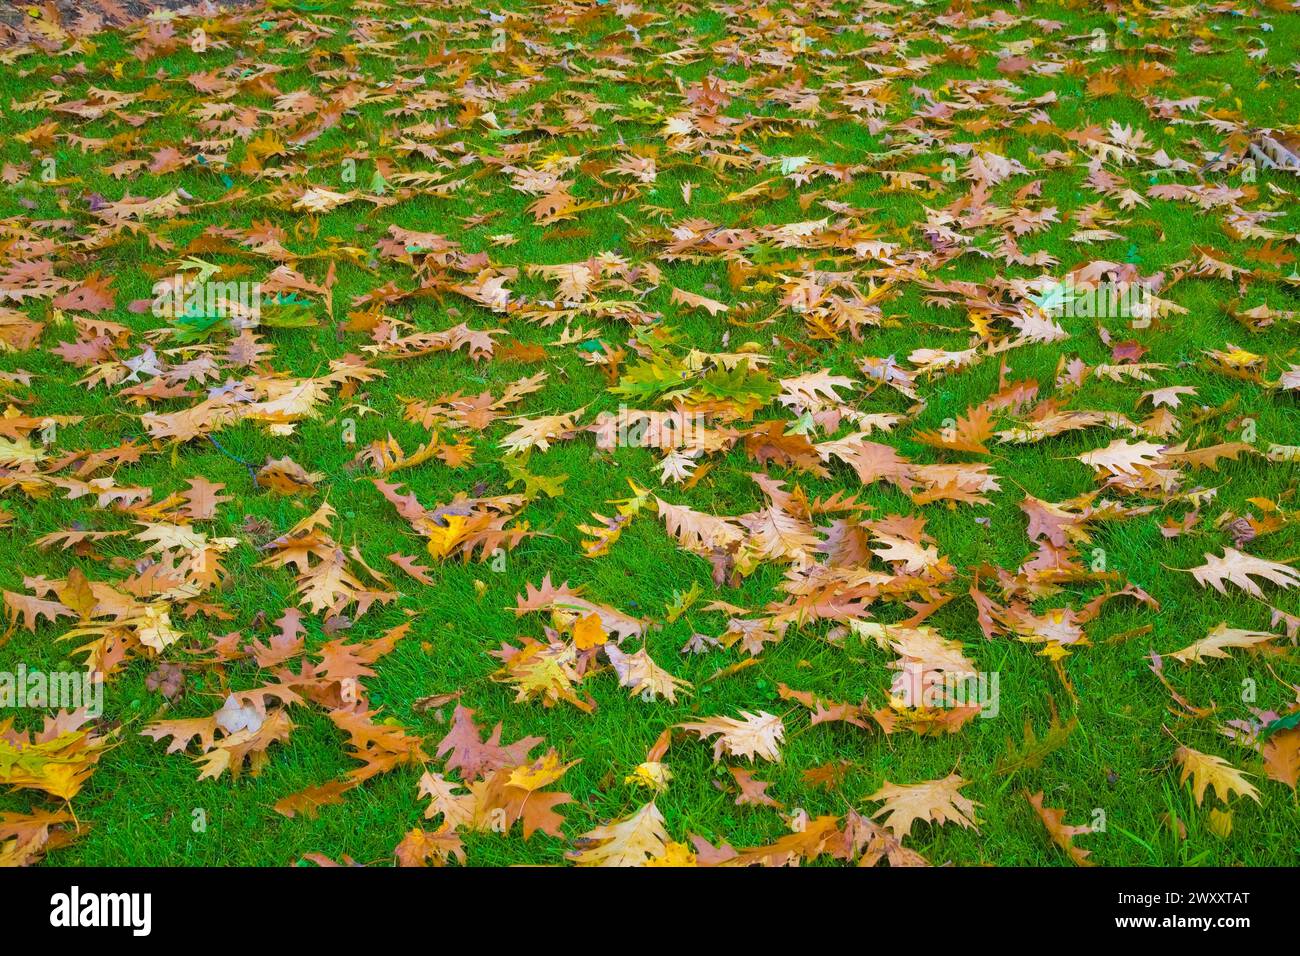 Fallen brown and yellow Quercus, Oak tree leaves on Poa pratensis, Kentucky Bluegrass lawn in autumn, Quebec, Canada Stock Photo